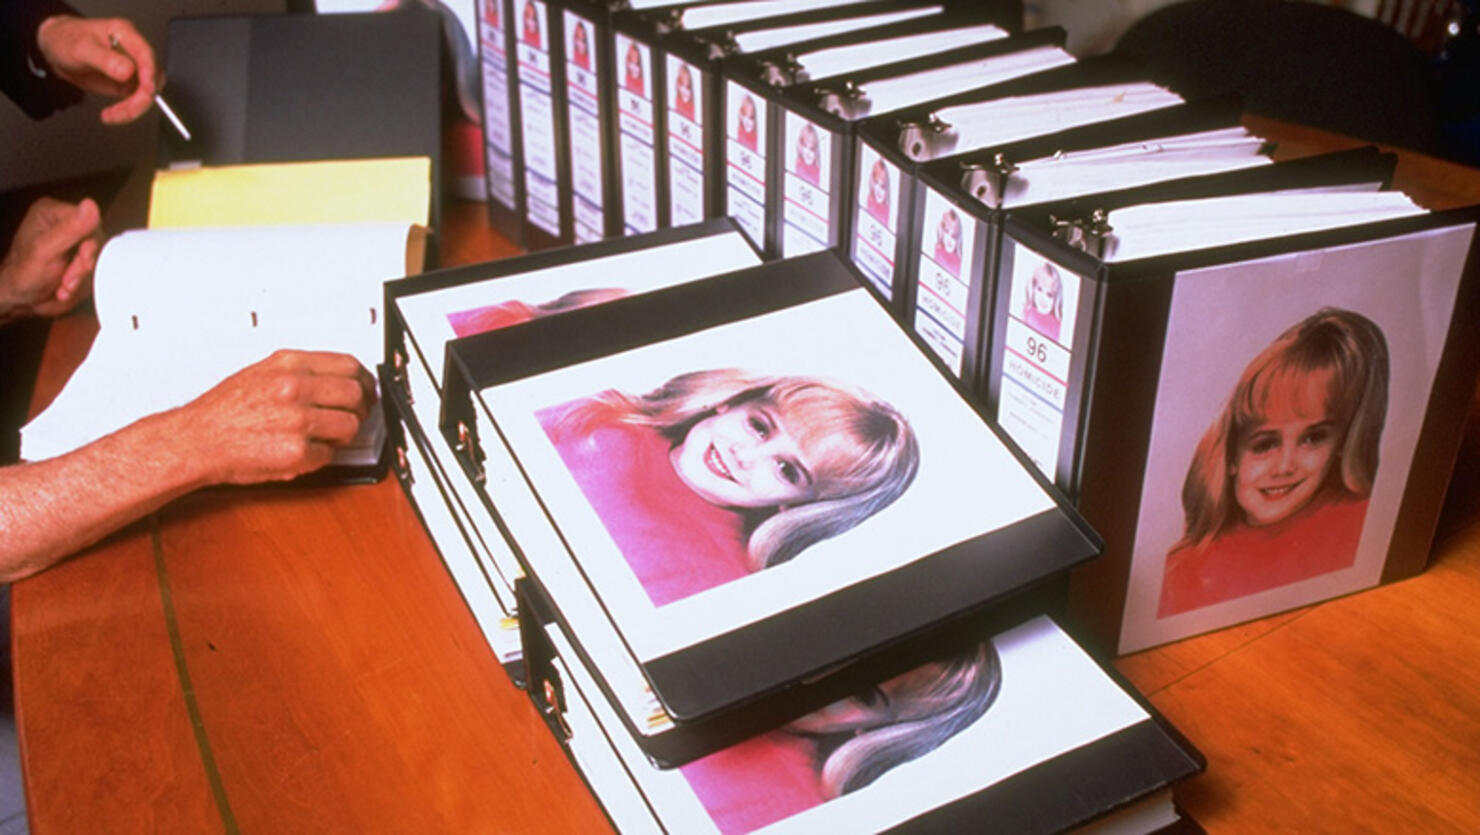 Murdered 6-yr-old beauty queen JonBenet Ramsey's image amblazoned on dozens of binders crammed w. investigators's reports for case which still unsolved